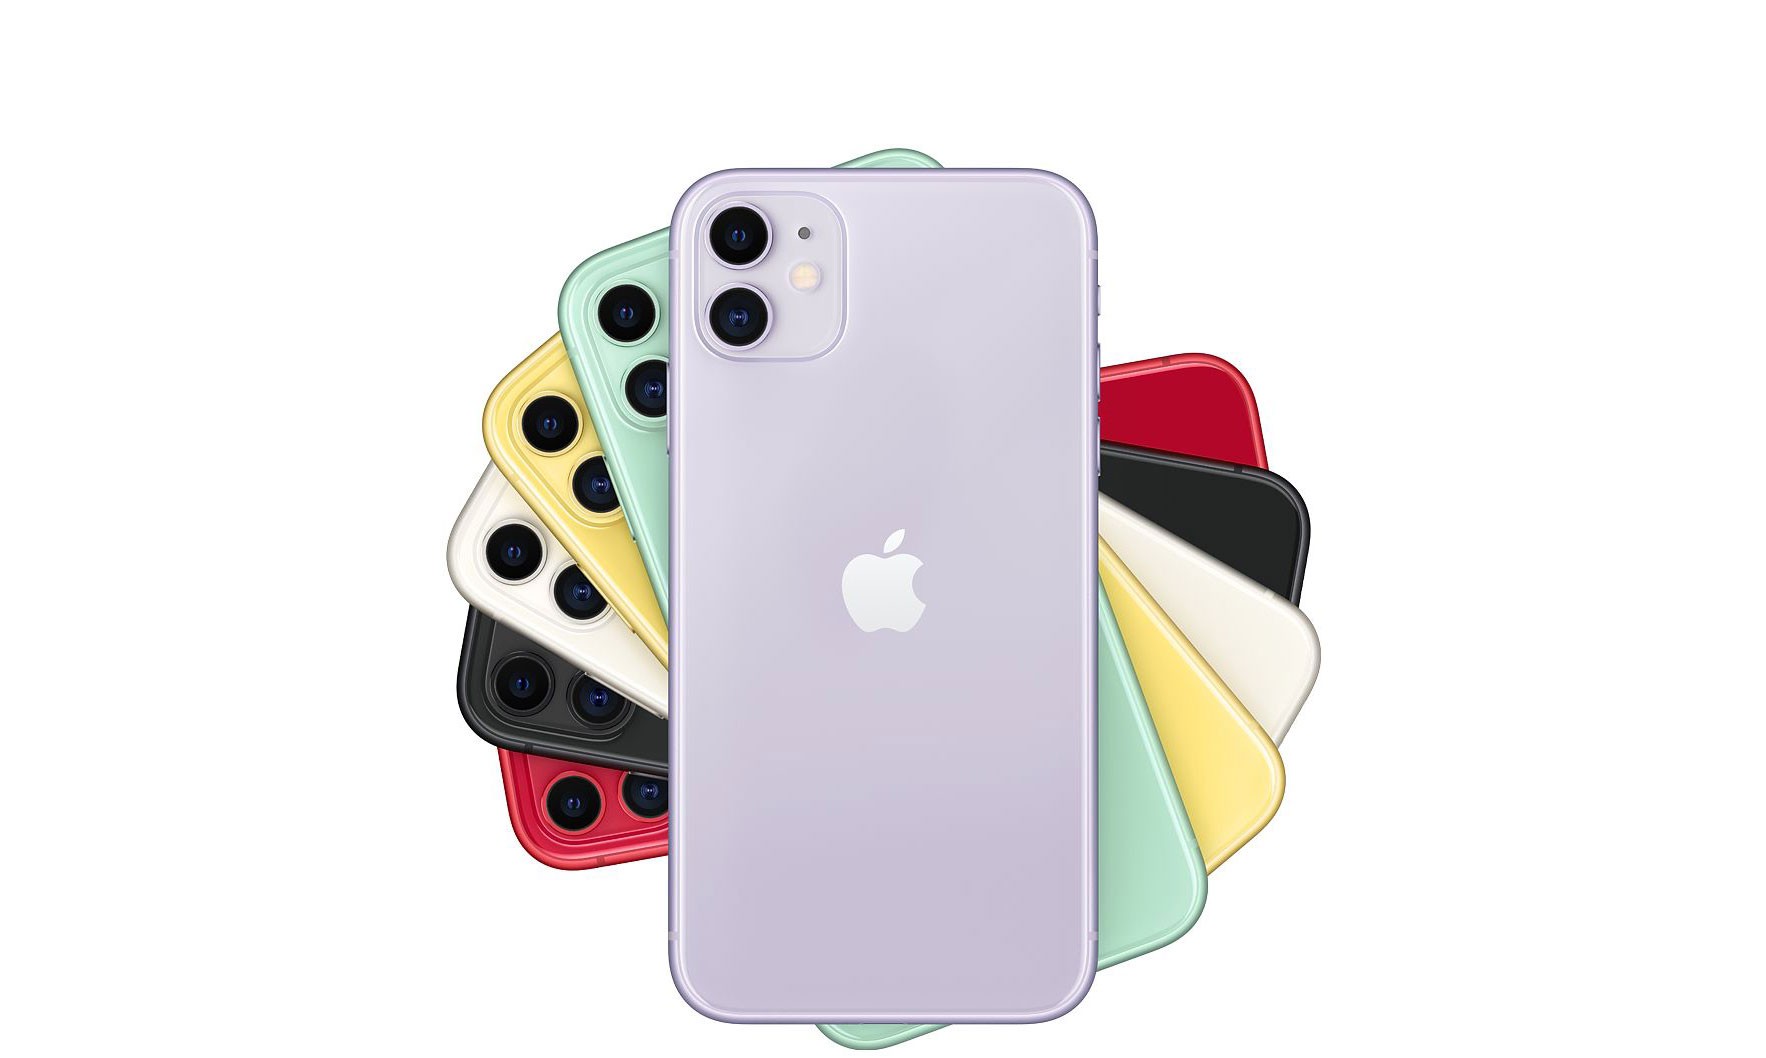 iphone 12 colors and storage